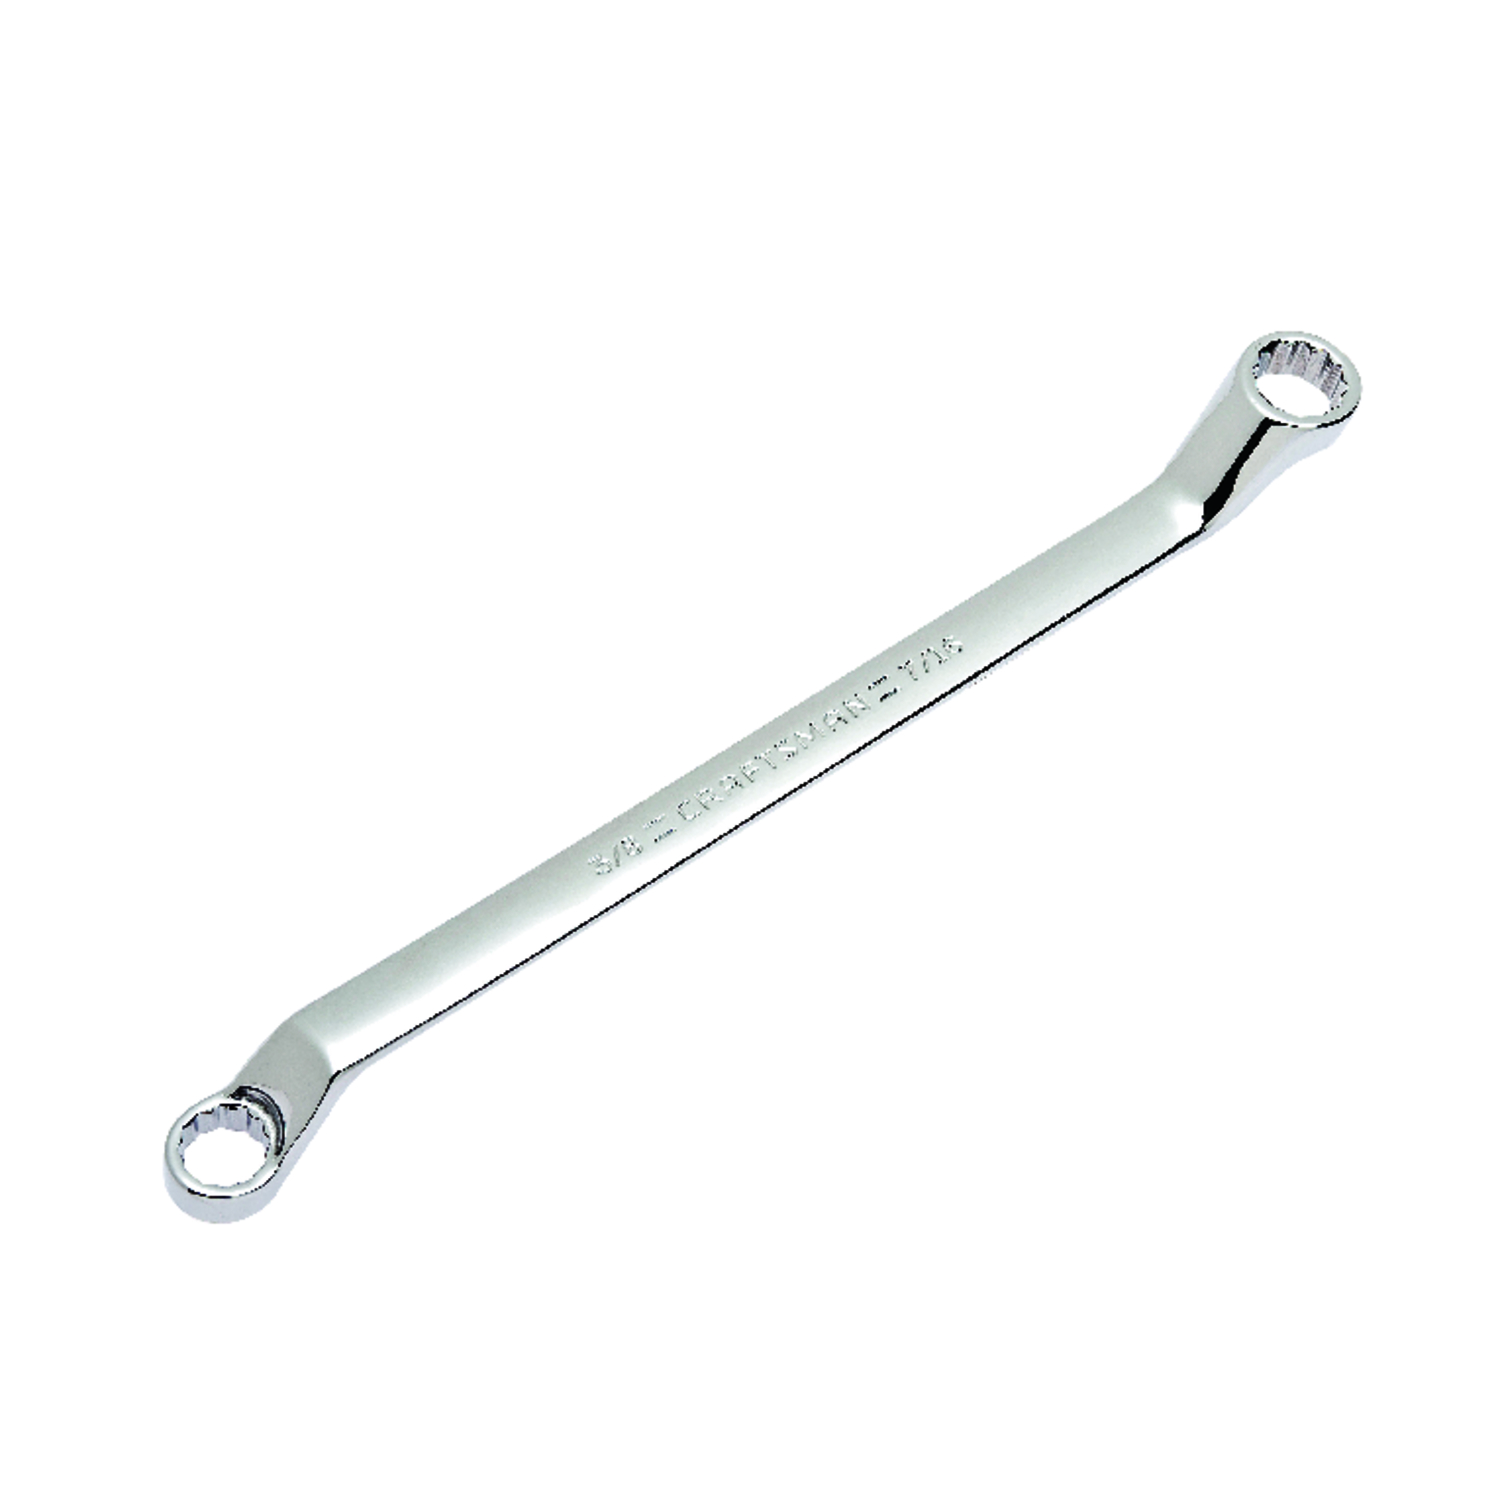 UPC 714994443162 product image for Craftsman 3/8in x 7/16in Deep Offset Standard Wrench (00944316) | upcitemdb.com